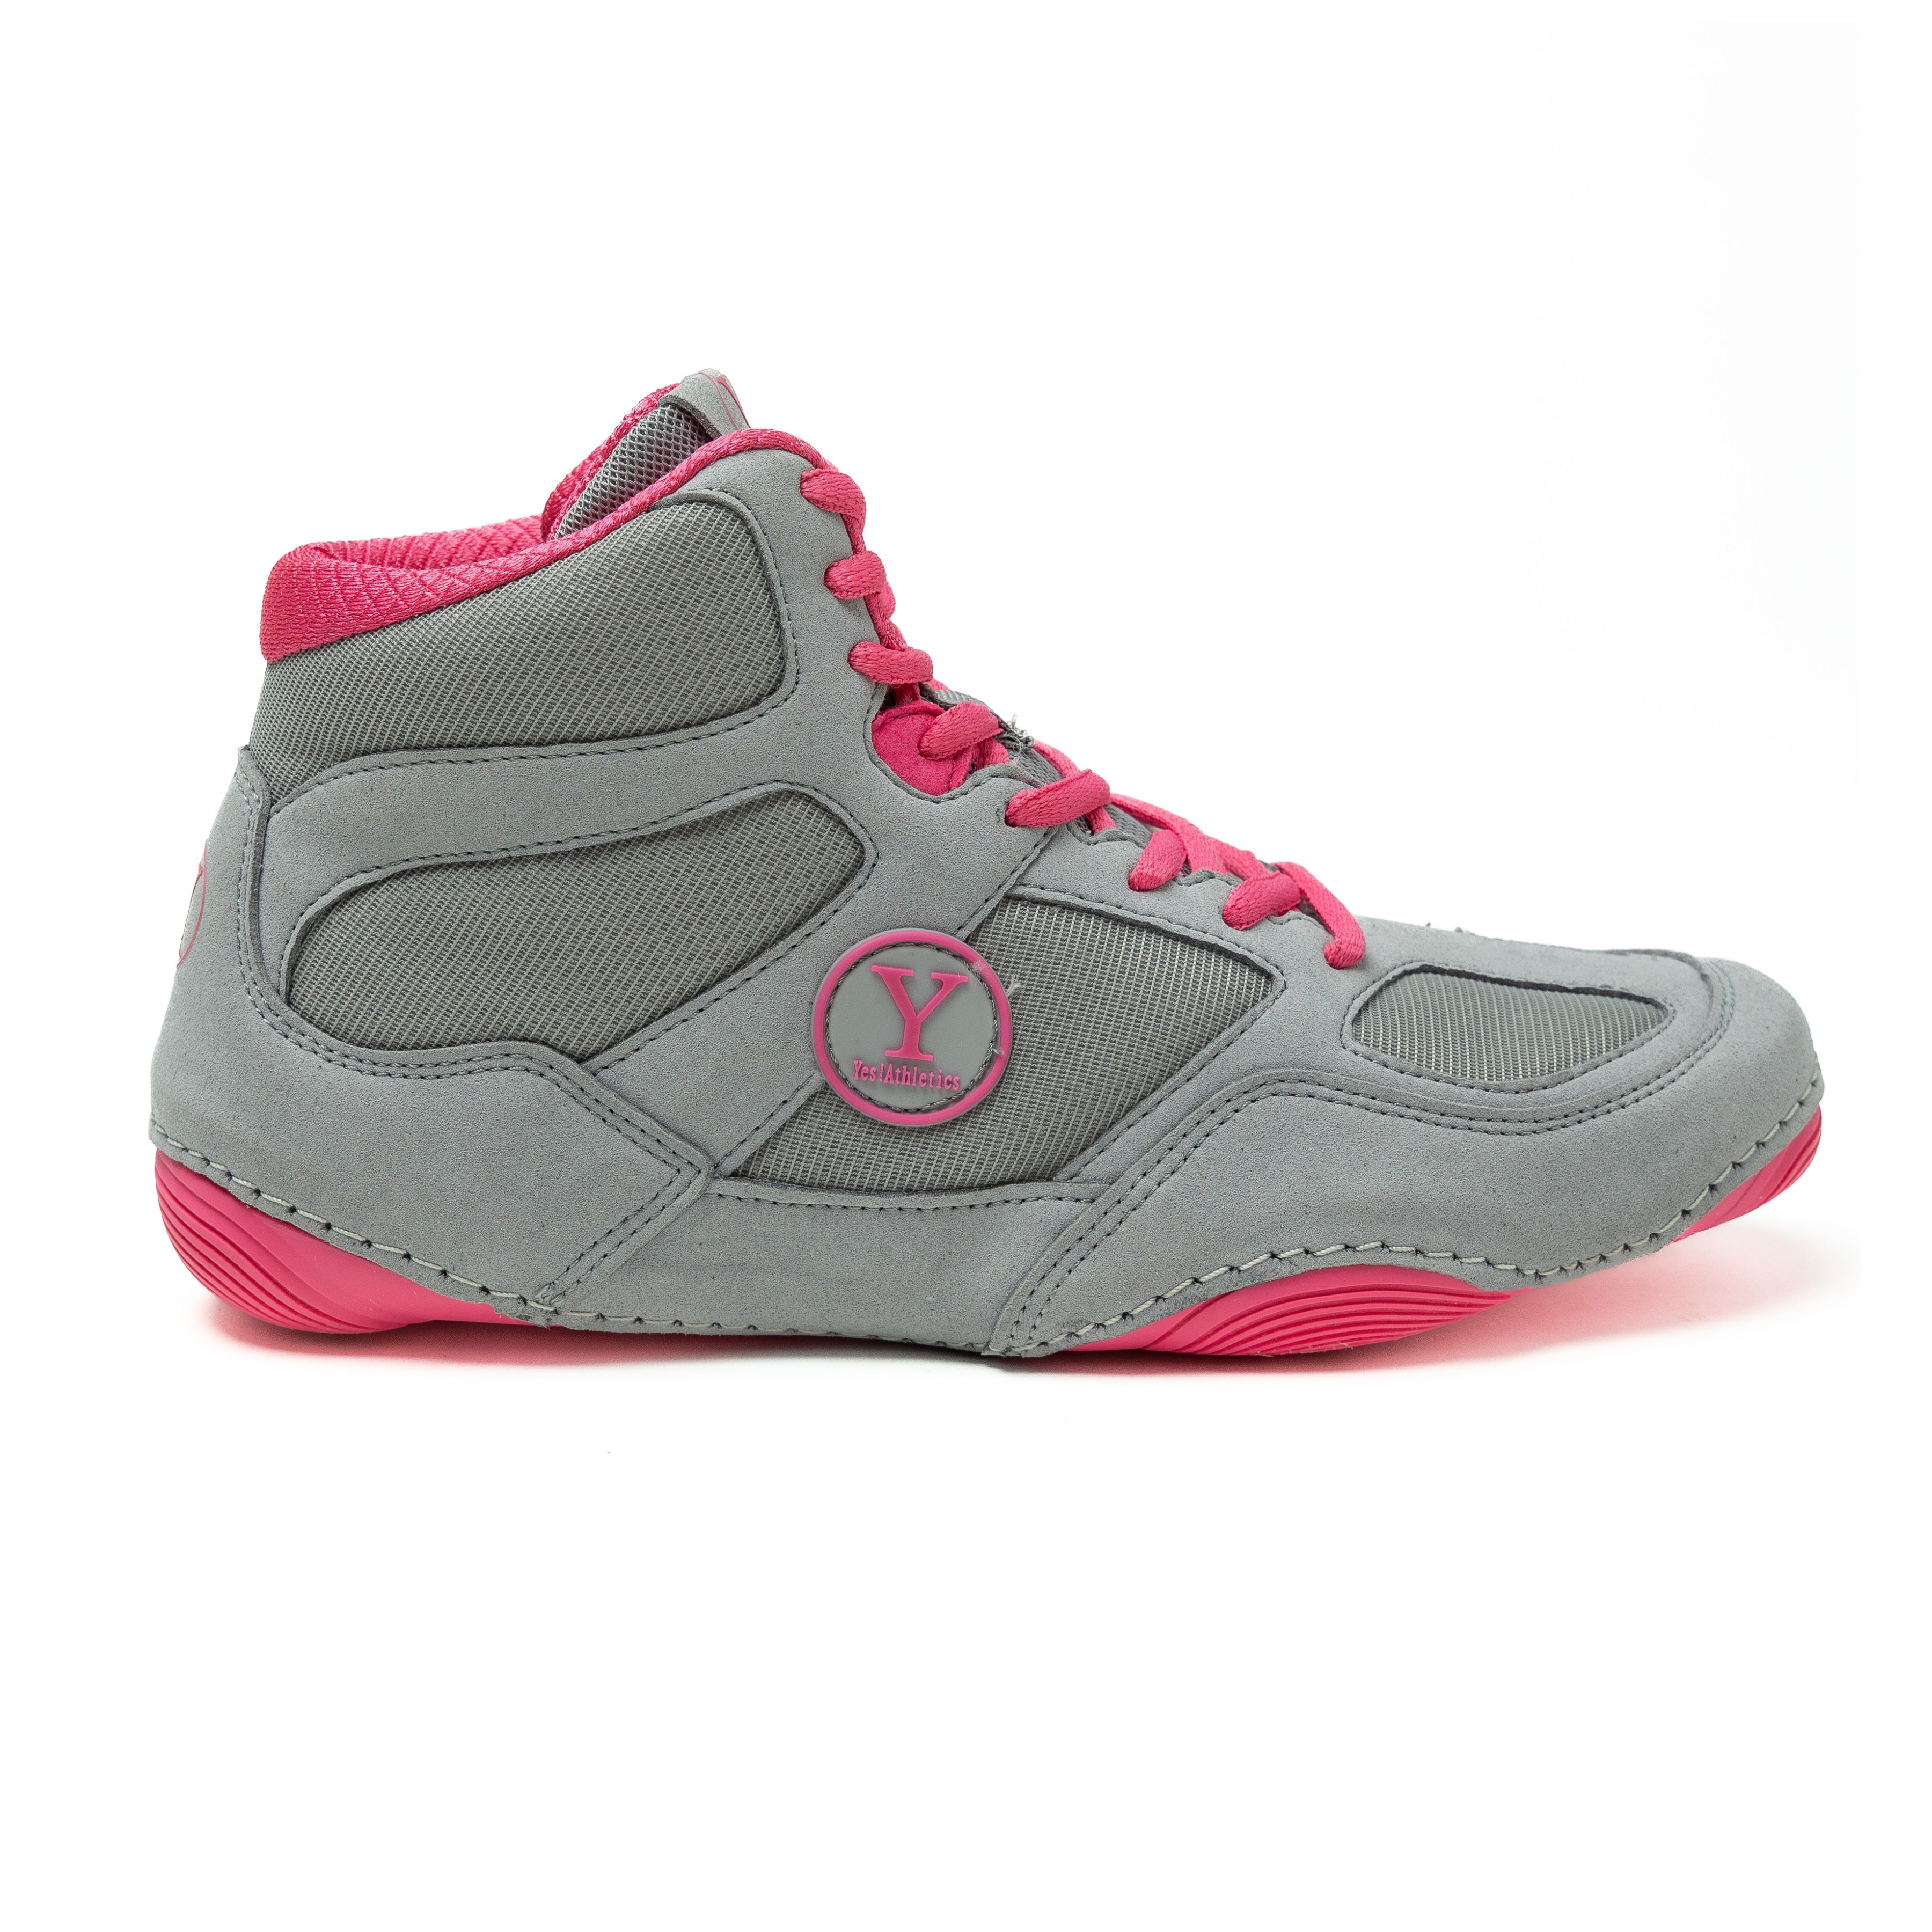 Grey and pink Yes! Athletics Defiant2 womens wrestling shoe